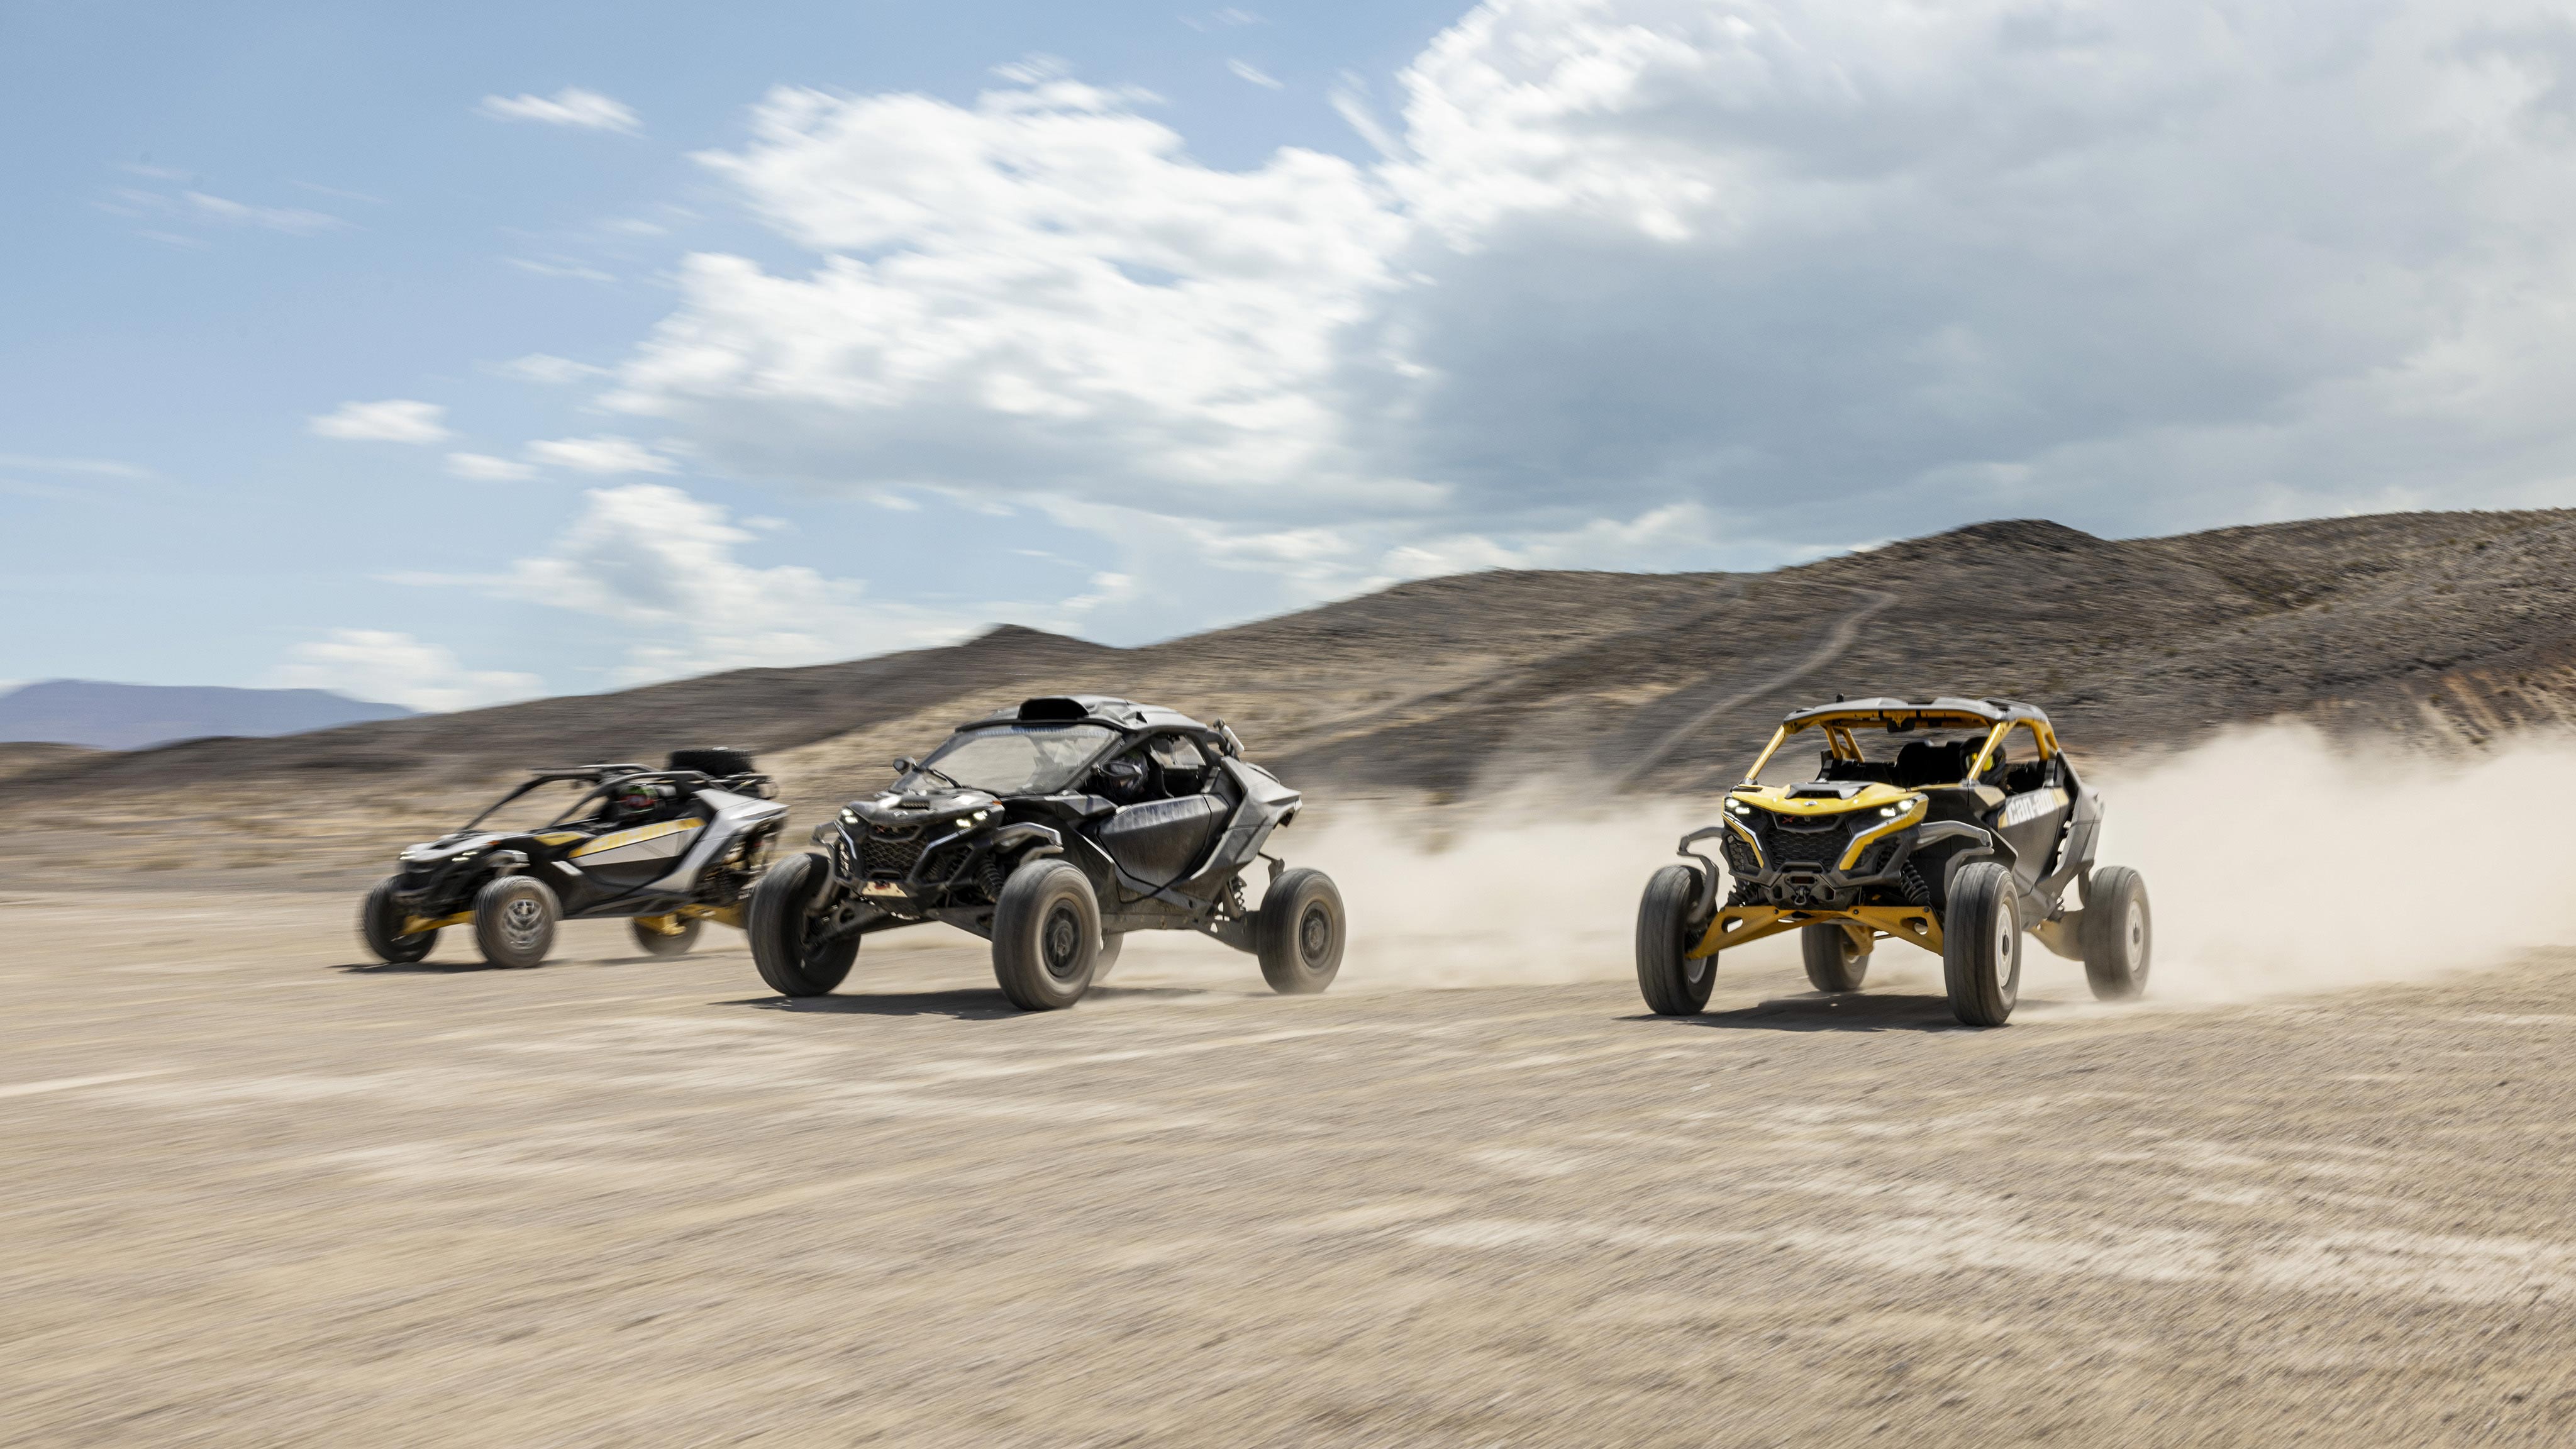 Three Can-Am Off-Road SxS vehicles racing through the desert